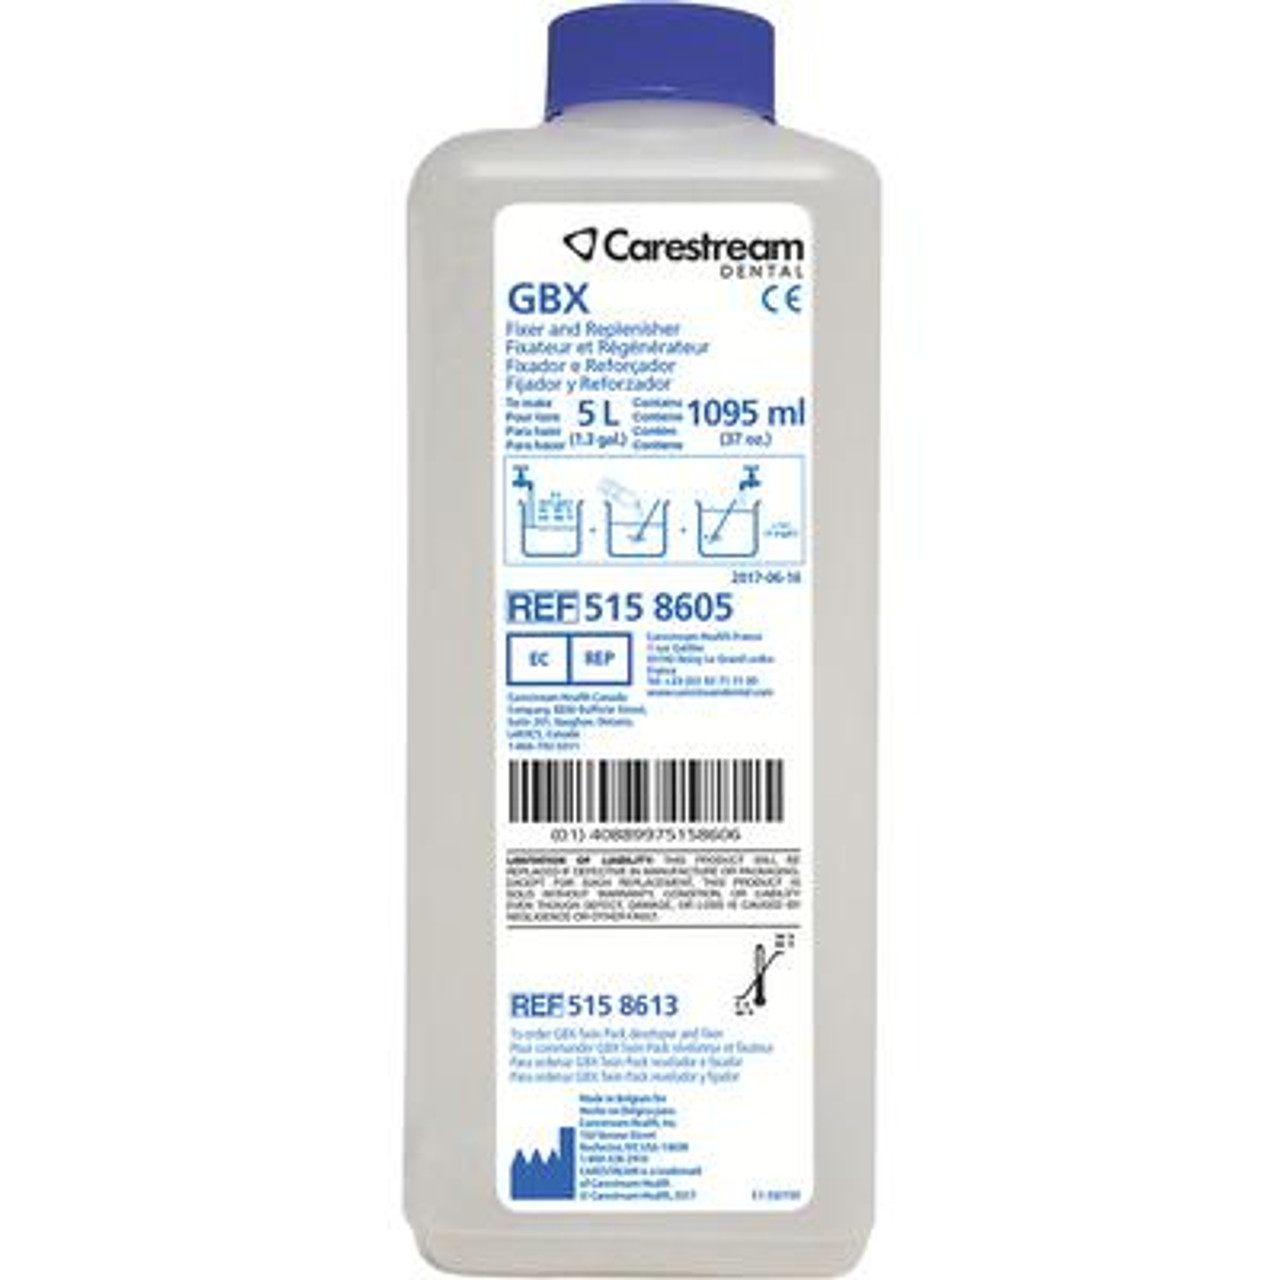 Carestream GBX Manual Fixer & Replinisher, 1 Liter  bottle (makes 5 Liters), 6/cs  (REPLACES 5158605)